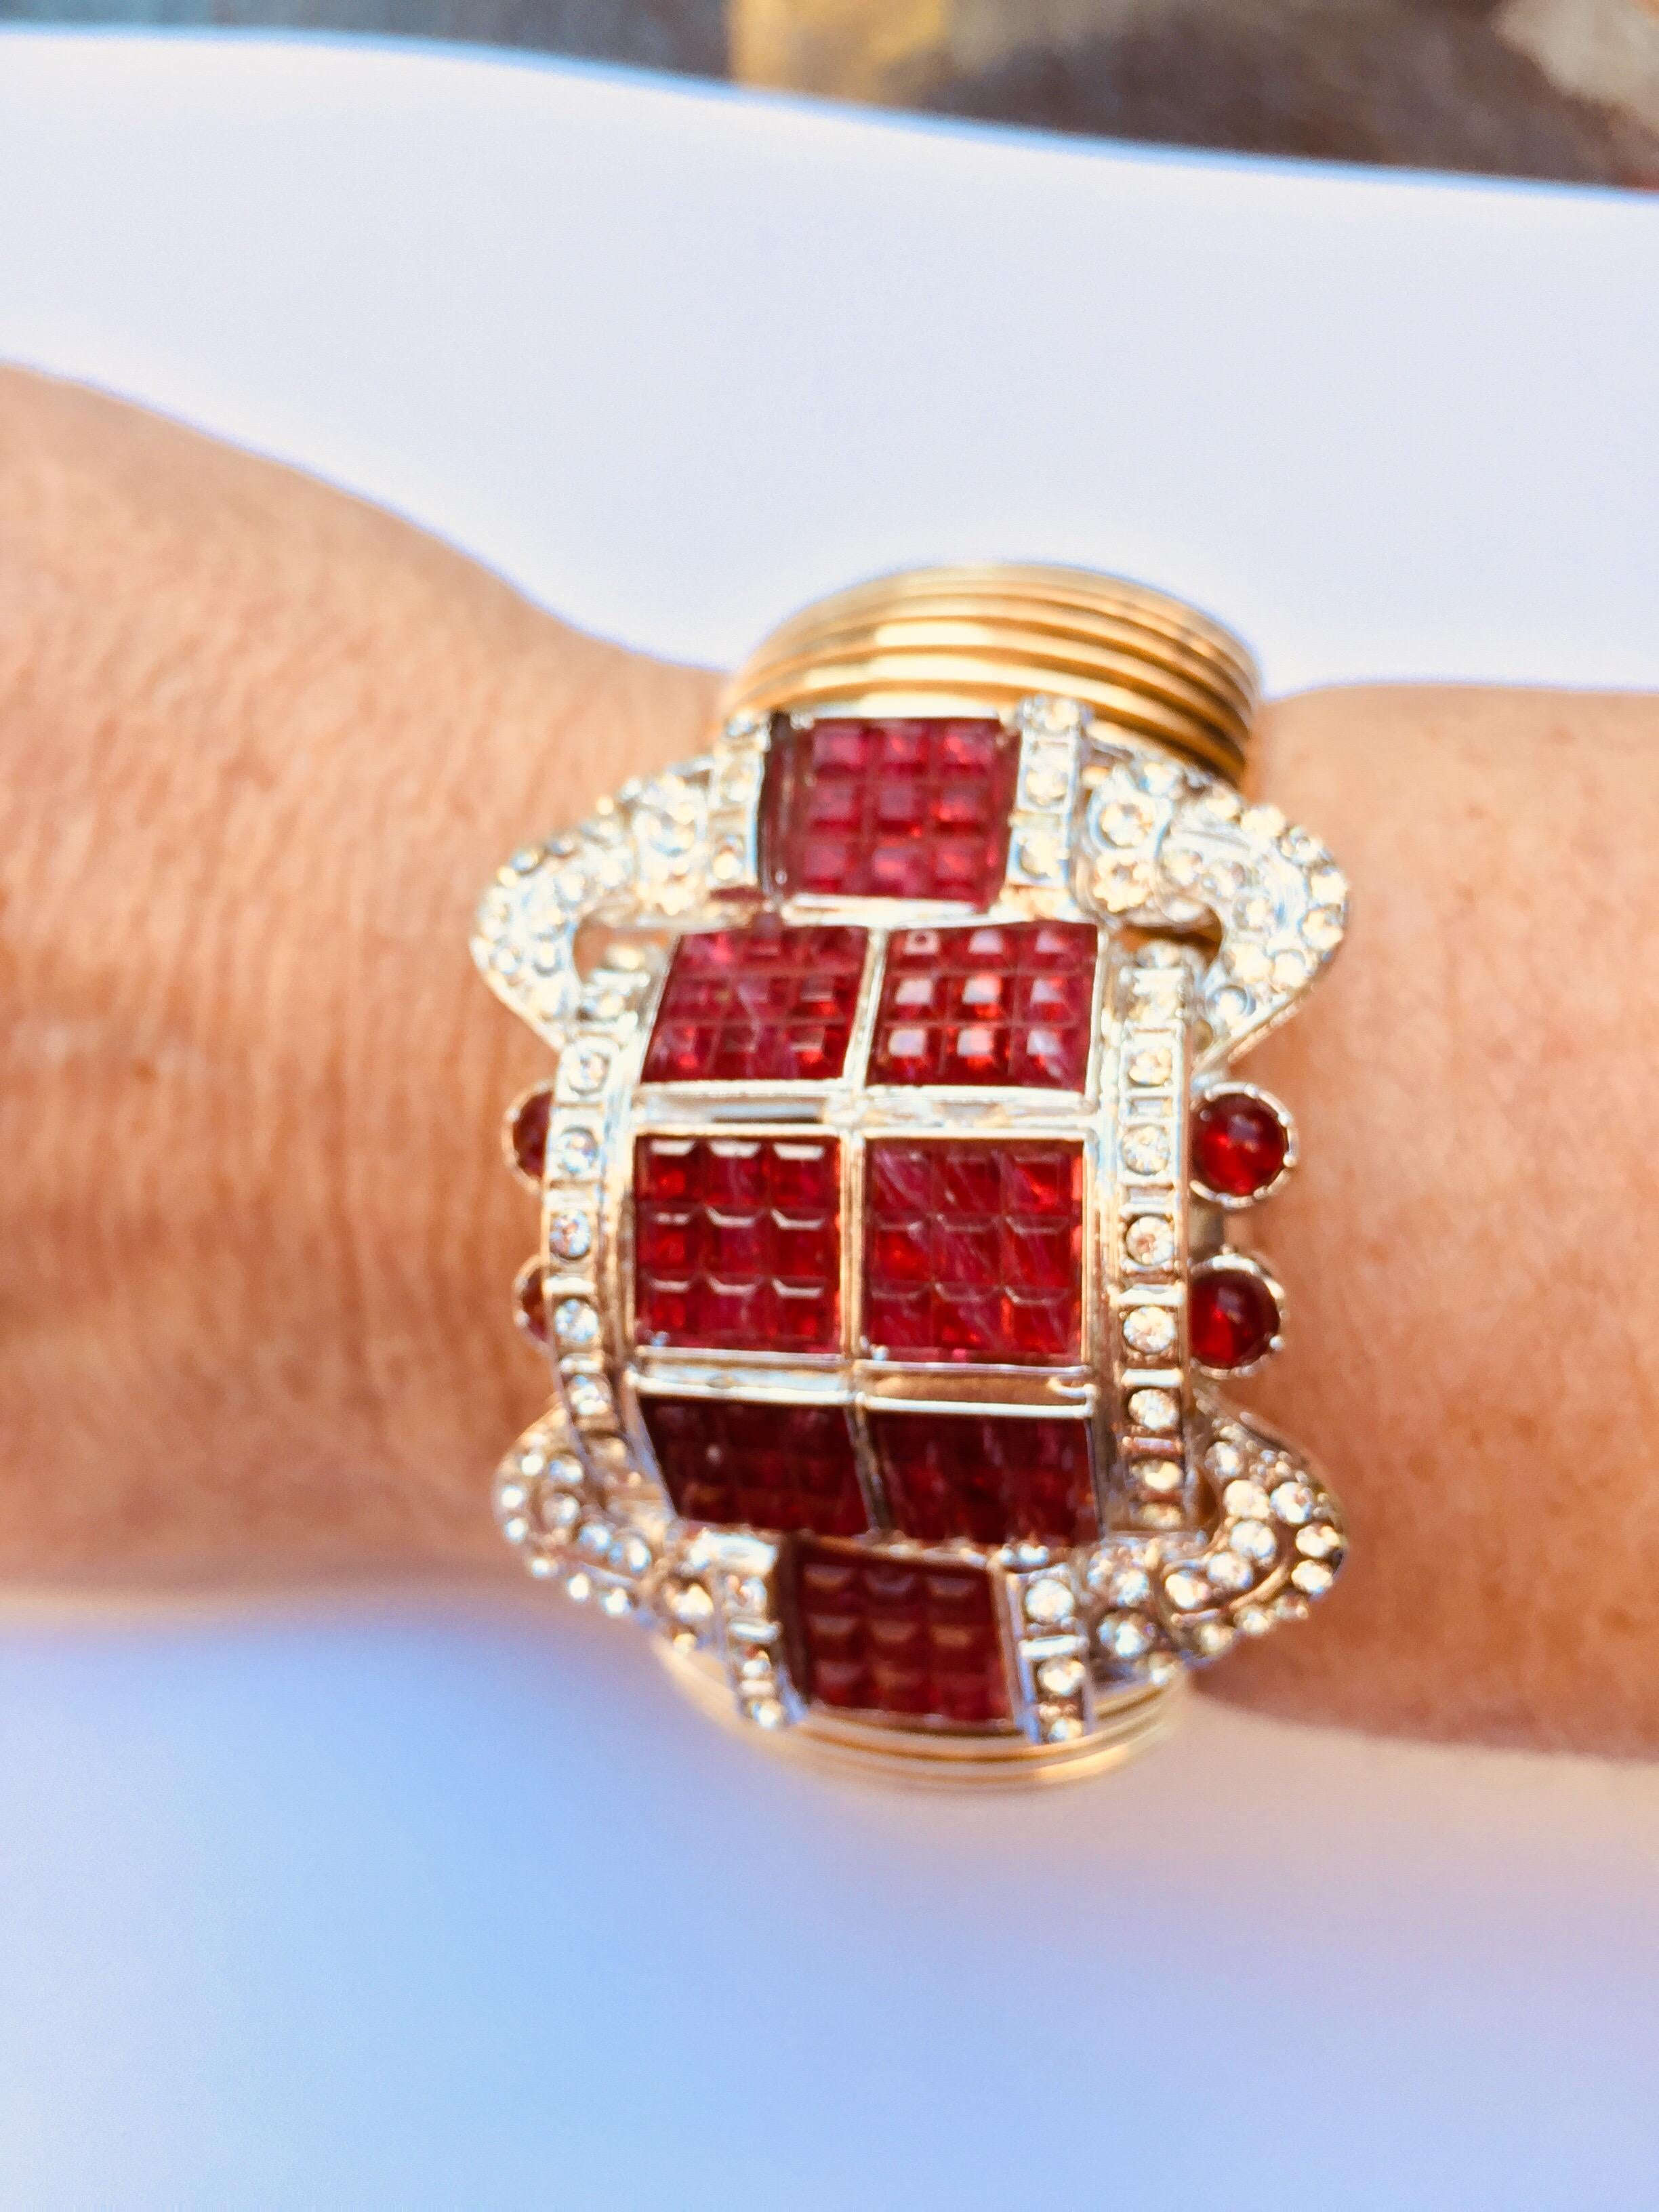 Italian Carlo Zini Tubogas Bracelet with Red Strass and Crystal